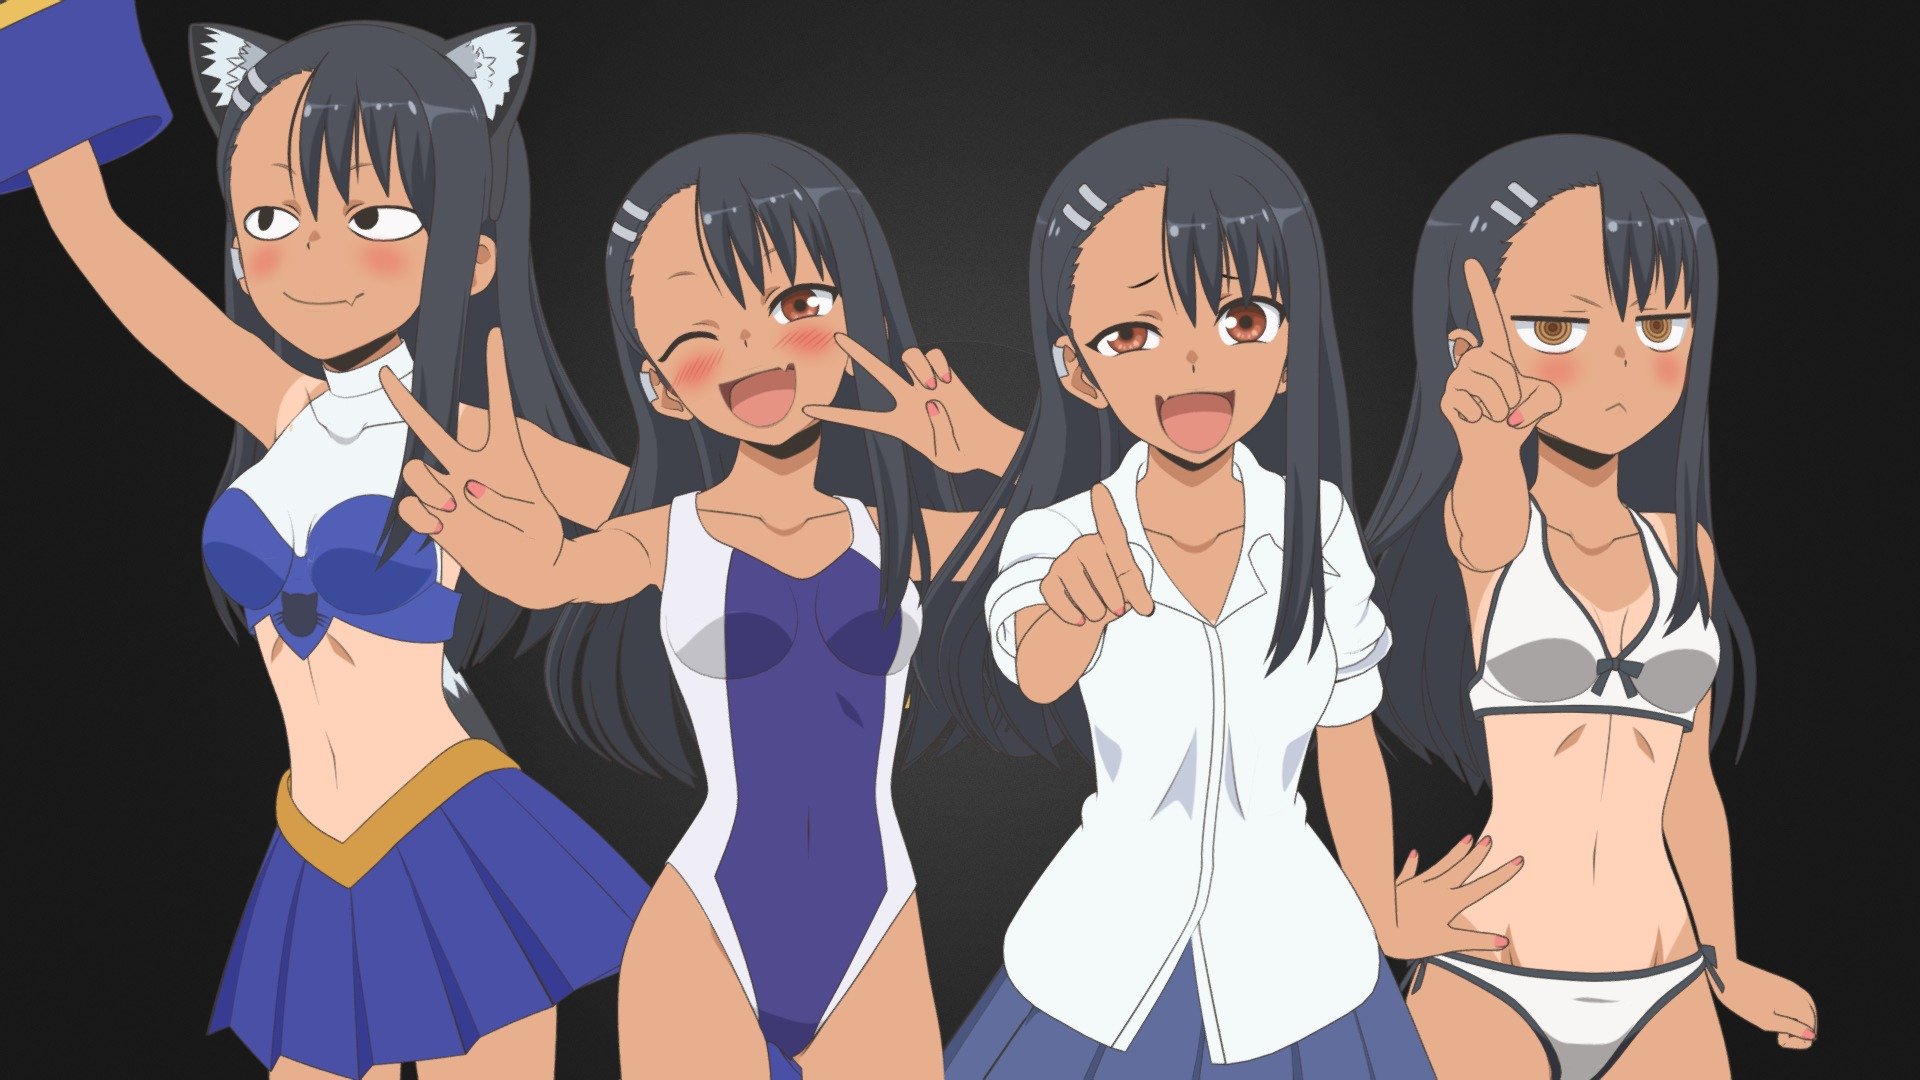 Nagatoro Hayase, character from the anime Don't Toy With Me, Miss Nagatoro.

3D Model Rigged. With Shape Keys. In blend format, for Blender V3.6 or higher. EEVEE renderer, with nodes, material Toon Shader.

▬▬▬▬▬▬▬▬▬▬▬▬▬▬▬▬▬▬▬▬▬▬▬▬▬▬▬▬▬▬▬▬▬▬▬▬▬▬▬▬▬▬▬▬▬▬

Buy Artstation: https://www.artstation.com/a/34848826

Buy CGTrader: https://bit.ly/48kWQNo

▬▬▬▬▬▬▬▬▬▬▬▬▬▬▬▬▬▬▬▬▬▬▬▬▬▬▬▬▬▬▬▬▬▬▬▬▬▬▬▬▬▬▬▬▬▬

Contents of the .ZIP file:

● Folder with all textures in .tga Format.

● .blend file with the complete 3D Model.

Contents of the .blend file:

● Full Body, no deleted parts.

● Individual Hair, separated from the body.

● Pieces of clothing, separated from the body. (Individuals, Can be removed (except the socks))

● Complete RIG, with all bones for movement. (Metarig Rigify Armature)

● Shape Keys.

● Materials configured with nodes.

● UV mapping.

● Textures embedded in the .blend file.

● Modifiers. (Subdivide, Solidify and Outline for contours) - Nagatoro - Don't Toy With Me, Miss Nagatoro - 3D - 3D model by GilsonAnimes (@Gilson.Animes) 3d model